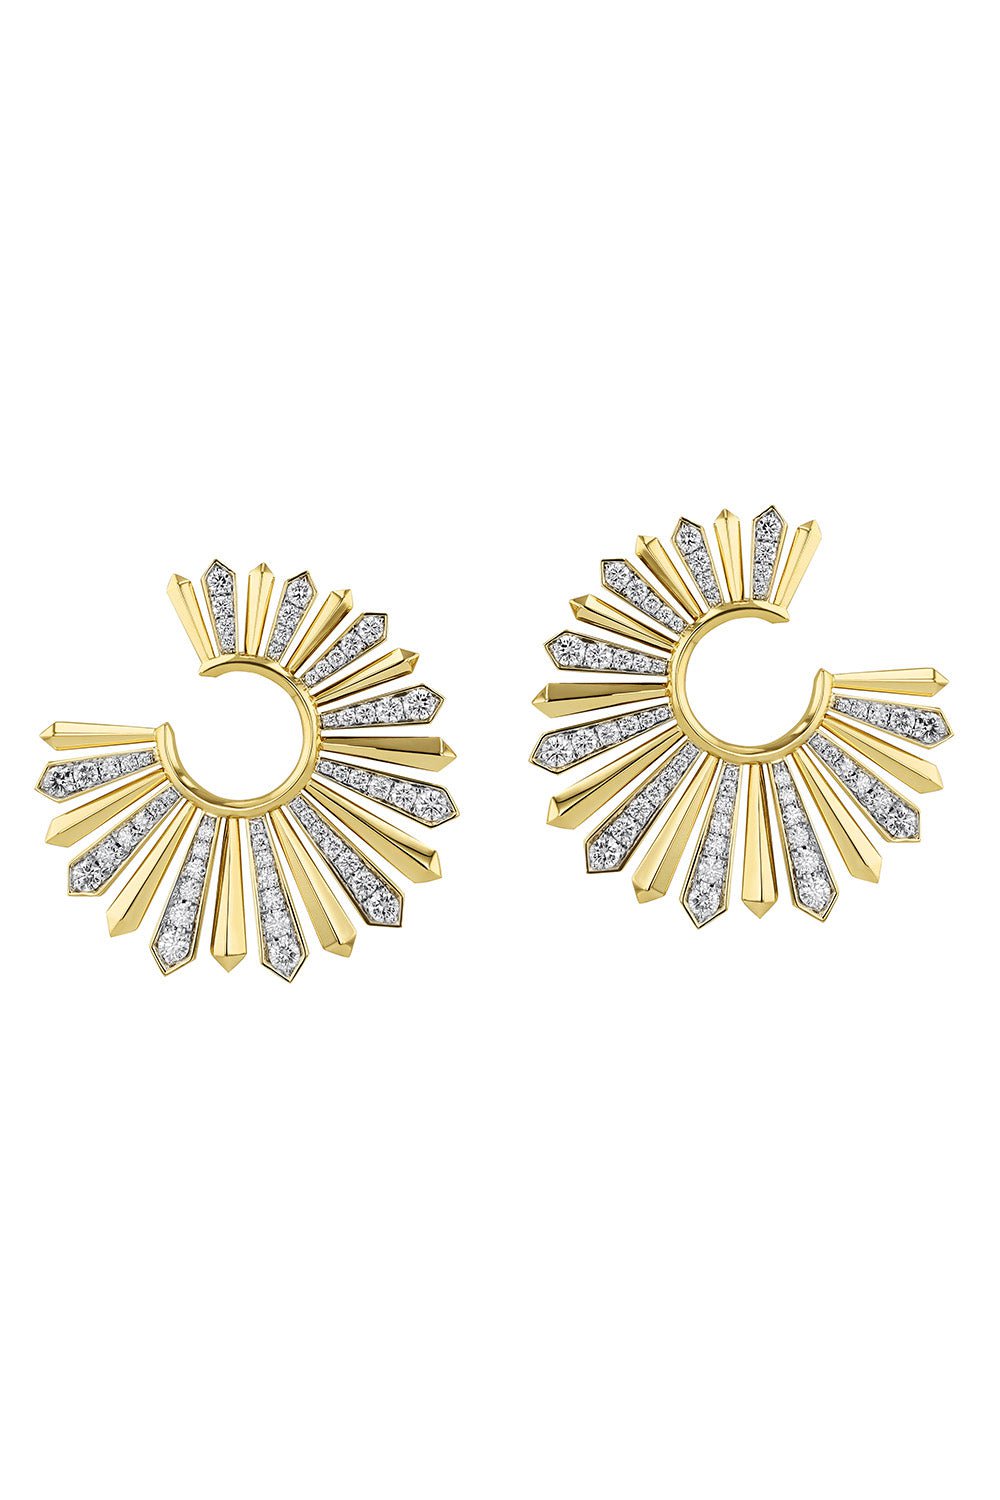 PHILLIPS HOUSE-Aura Feathered XL Fan Earrings-YELLOW GOLD